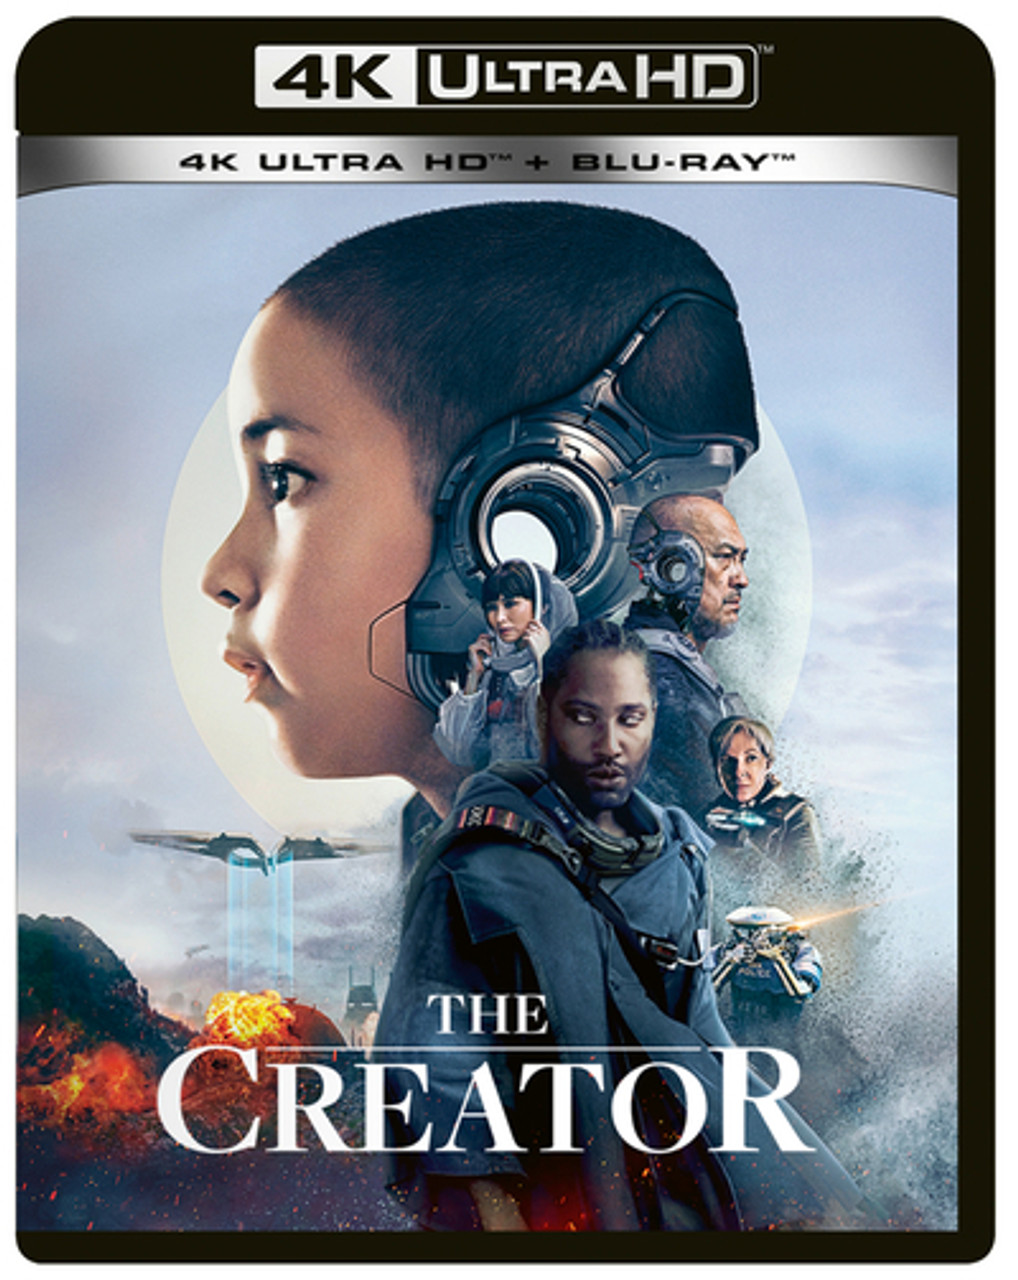 The Creator, Buy It Now on 4K UHD, Blu-ray & Digital, #TheCreator is now  on Blu-ray, 4K UHD & Digital. Add it to your movie collection today